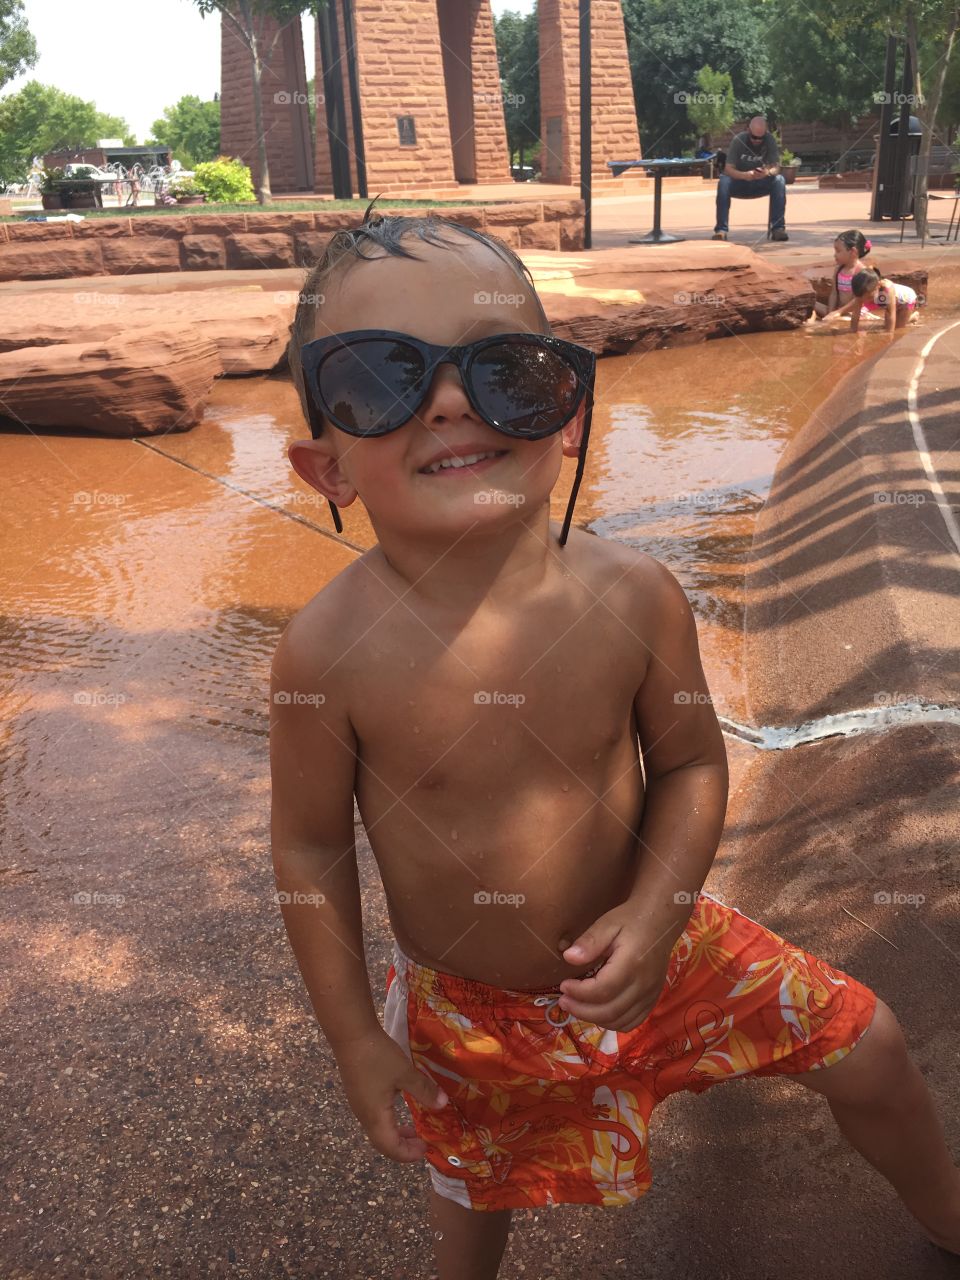 Boy wearing sunglasses at the water park